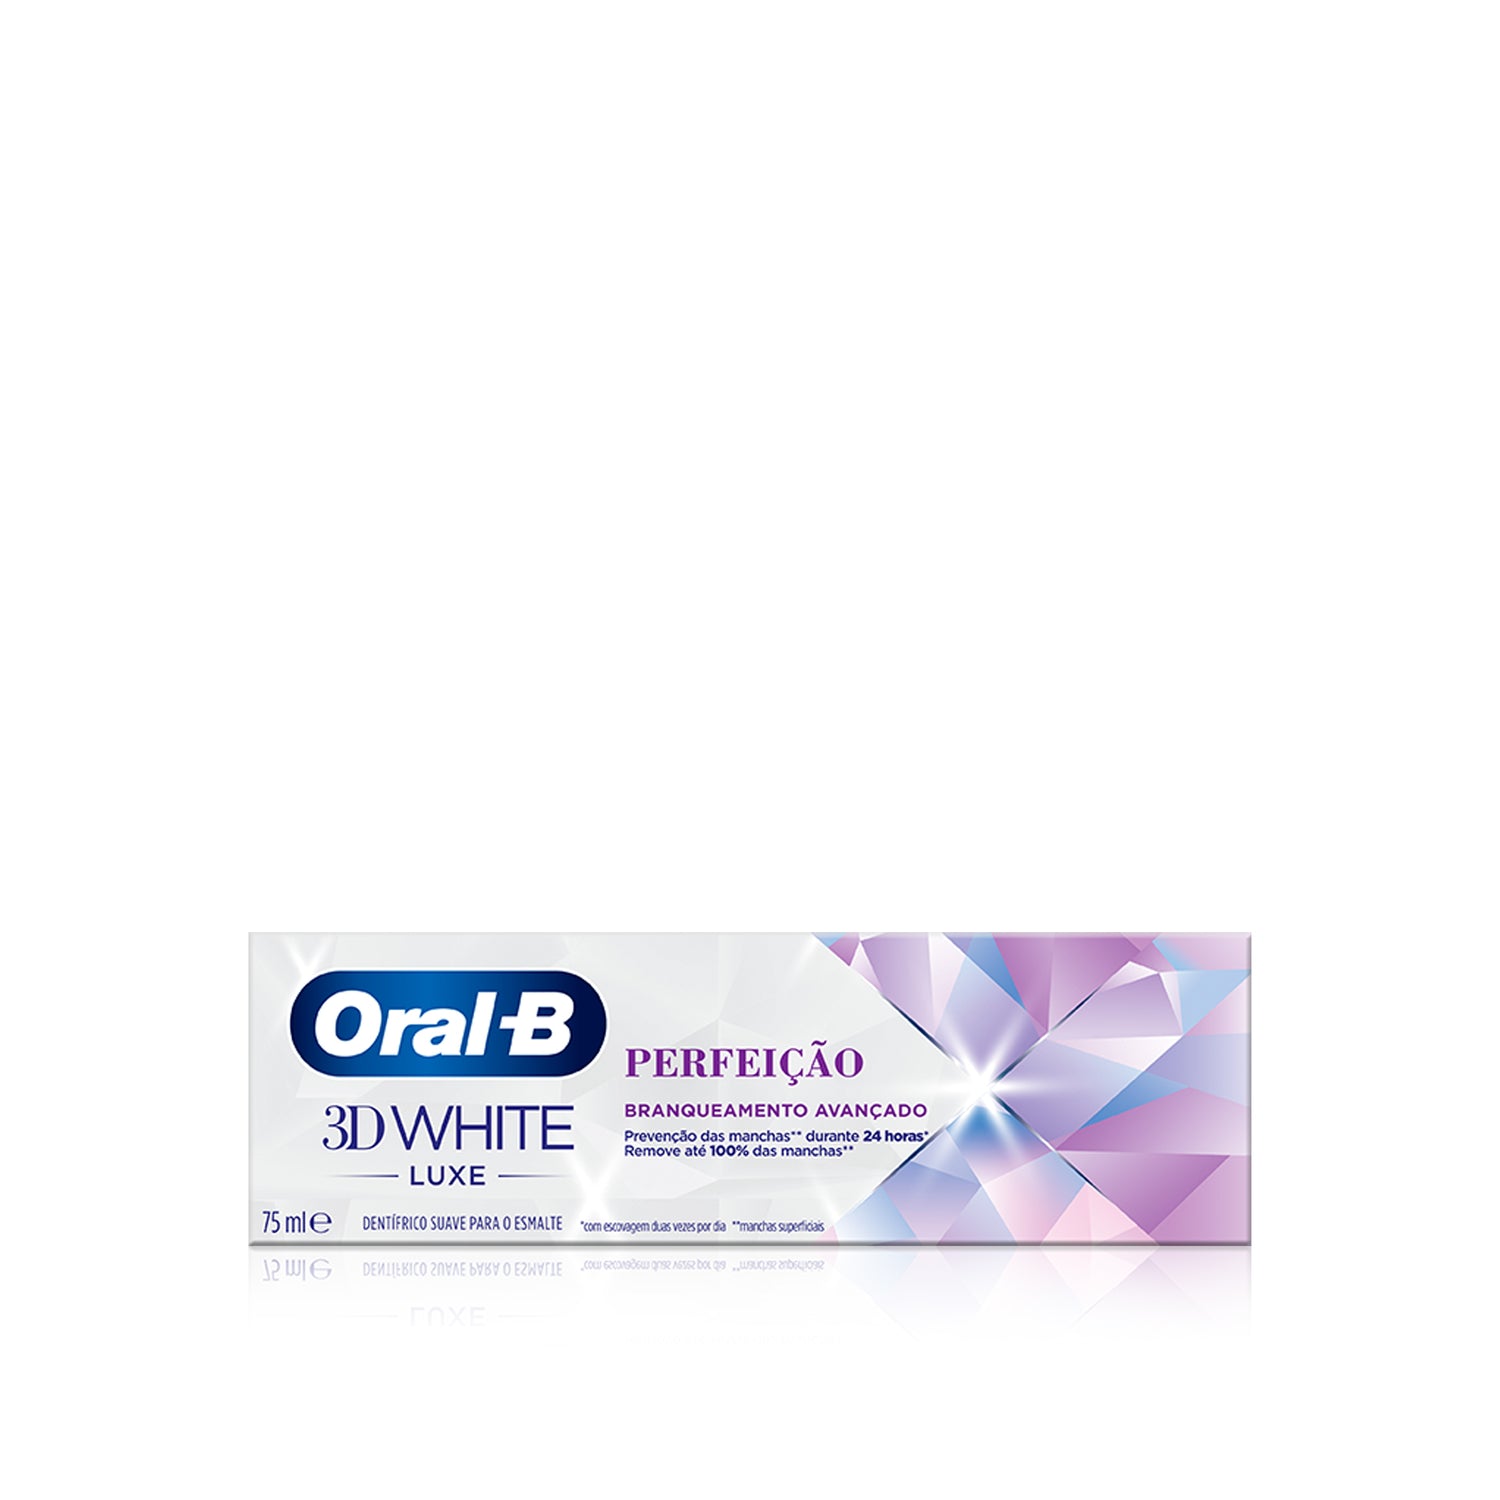 Oral-B 3D White Luxe Perfection Dentifrica Paste 75 Ml